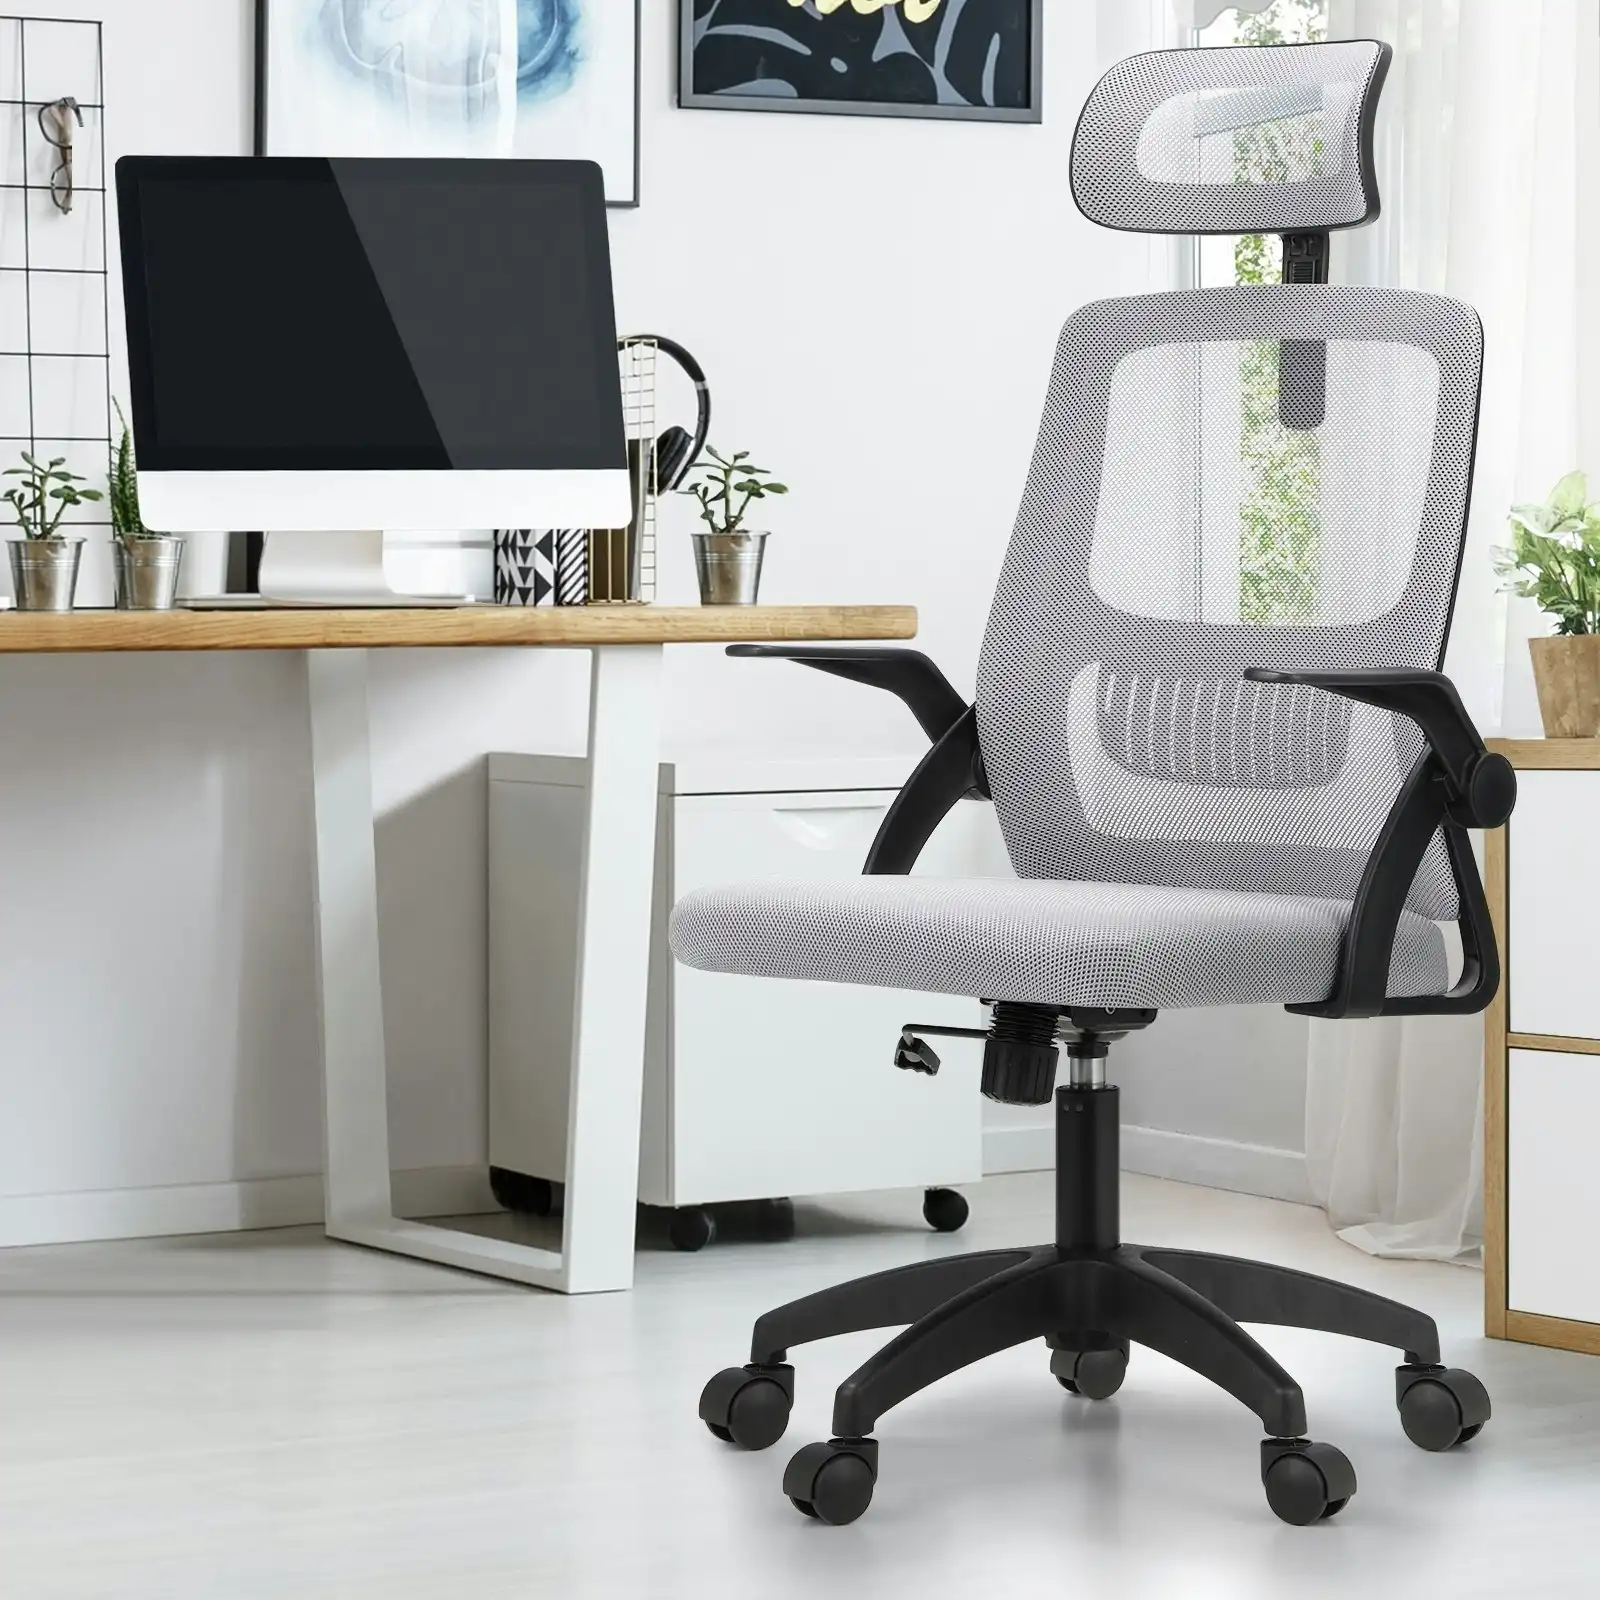 Oikiture Mesh Office Chair Executive Fabric Gaming Seat Racing Computer Black&Grey